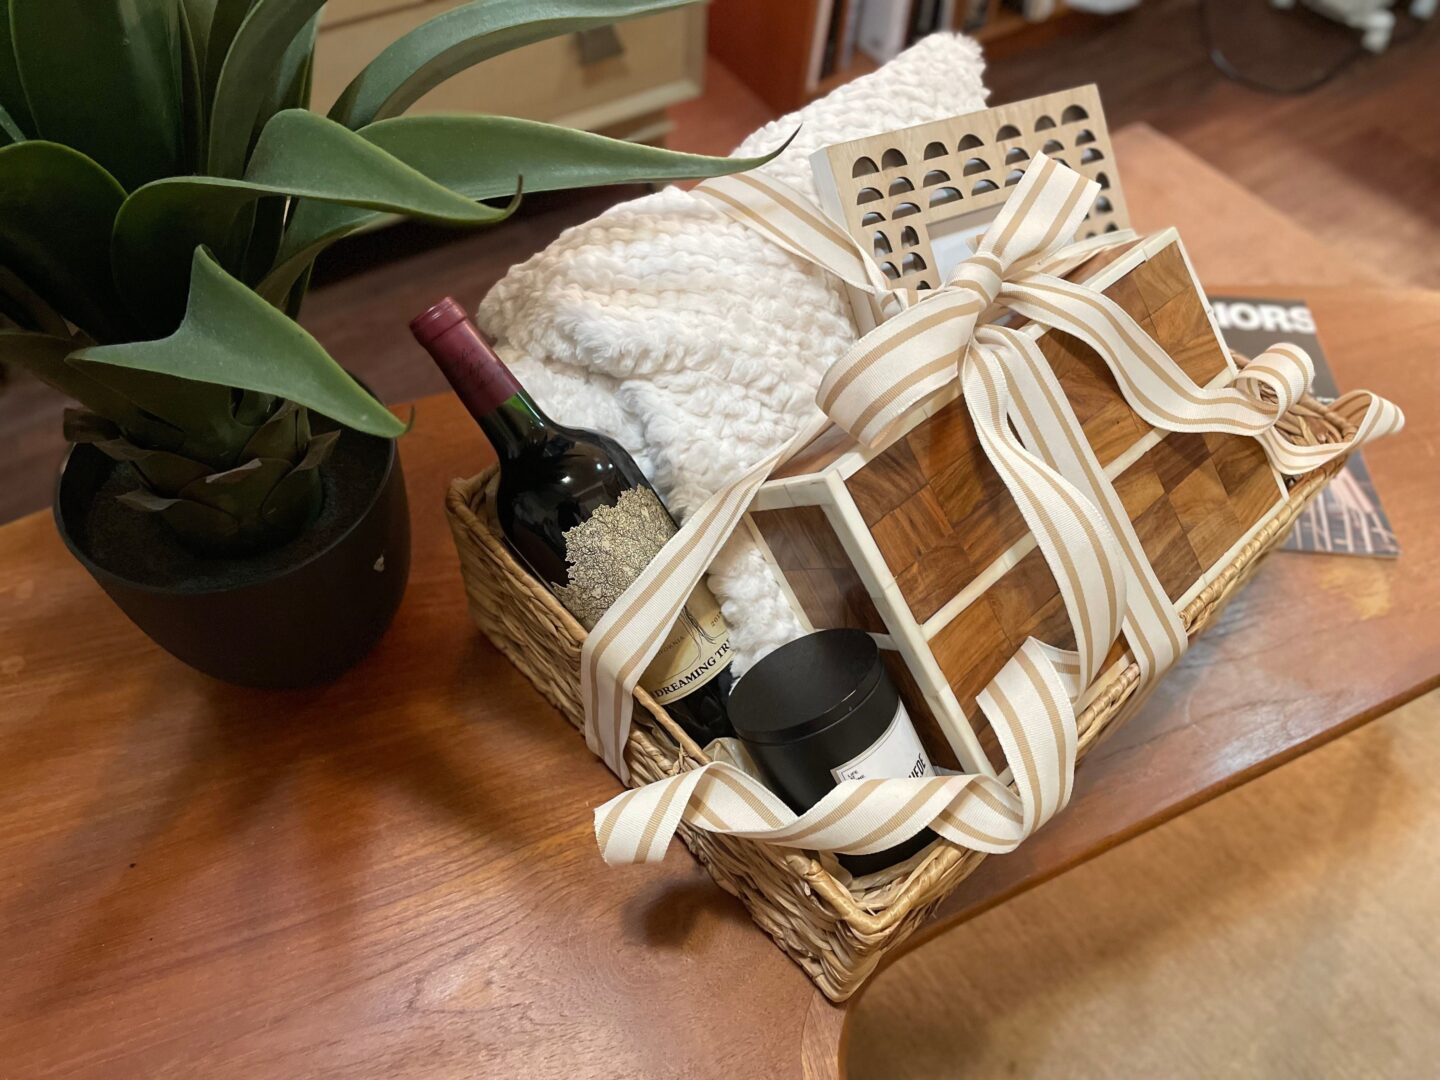 A basket with wine and towels on top of the table.